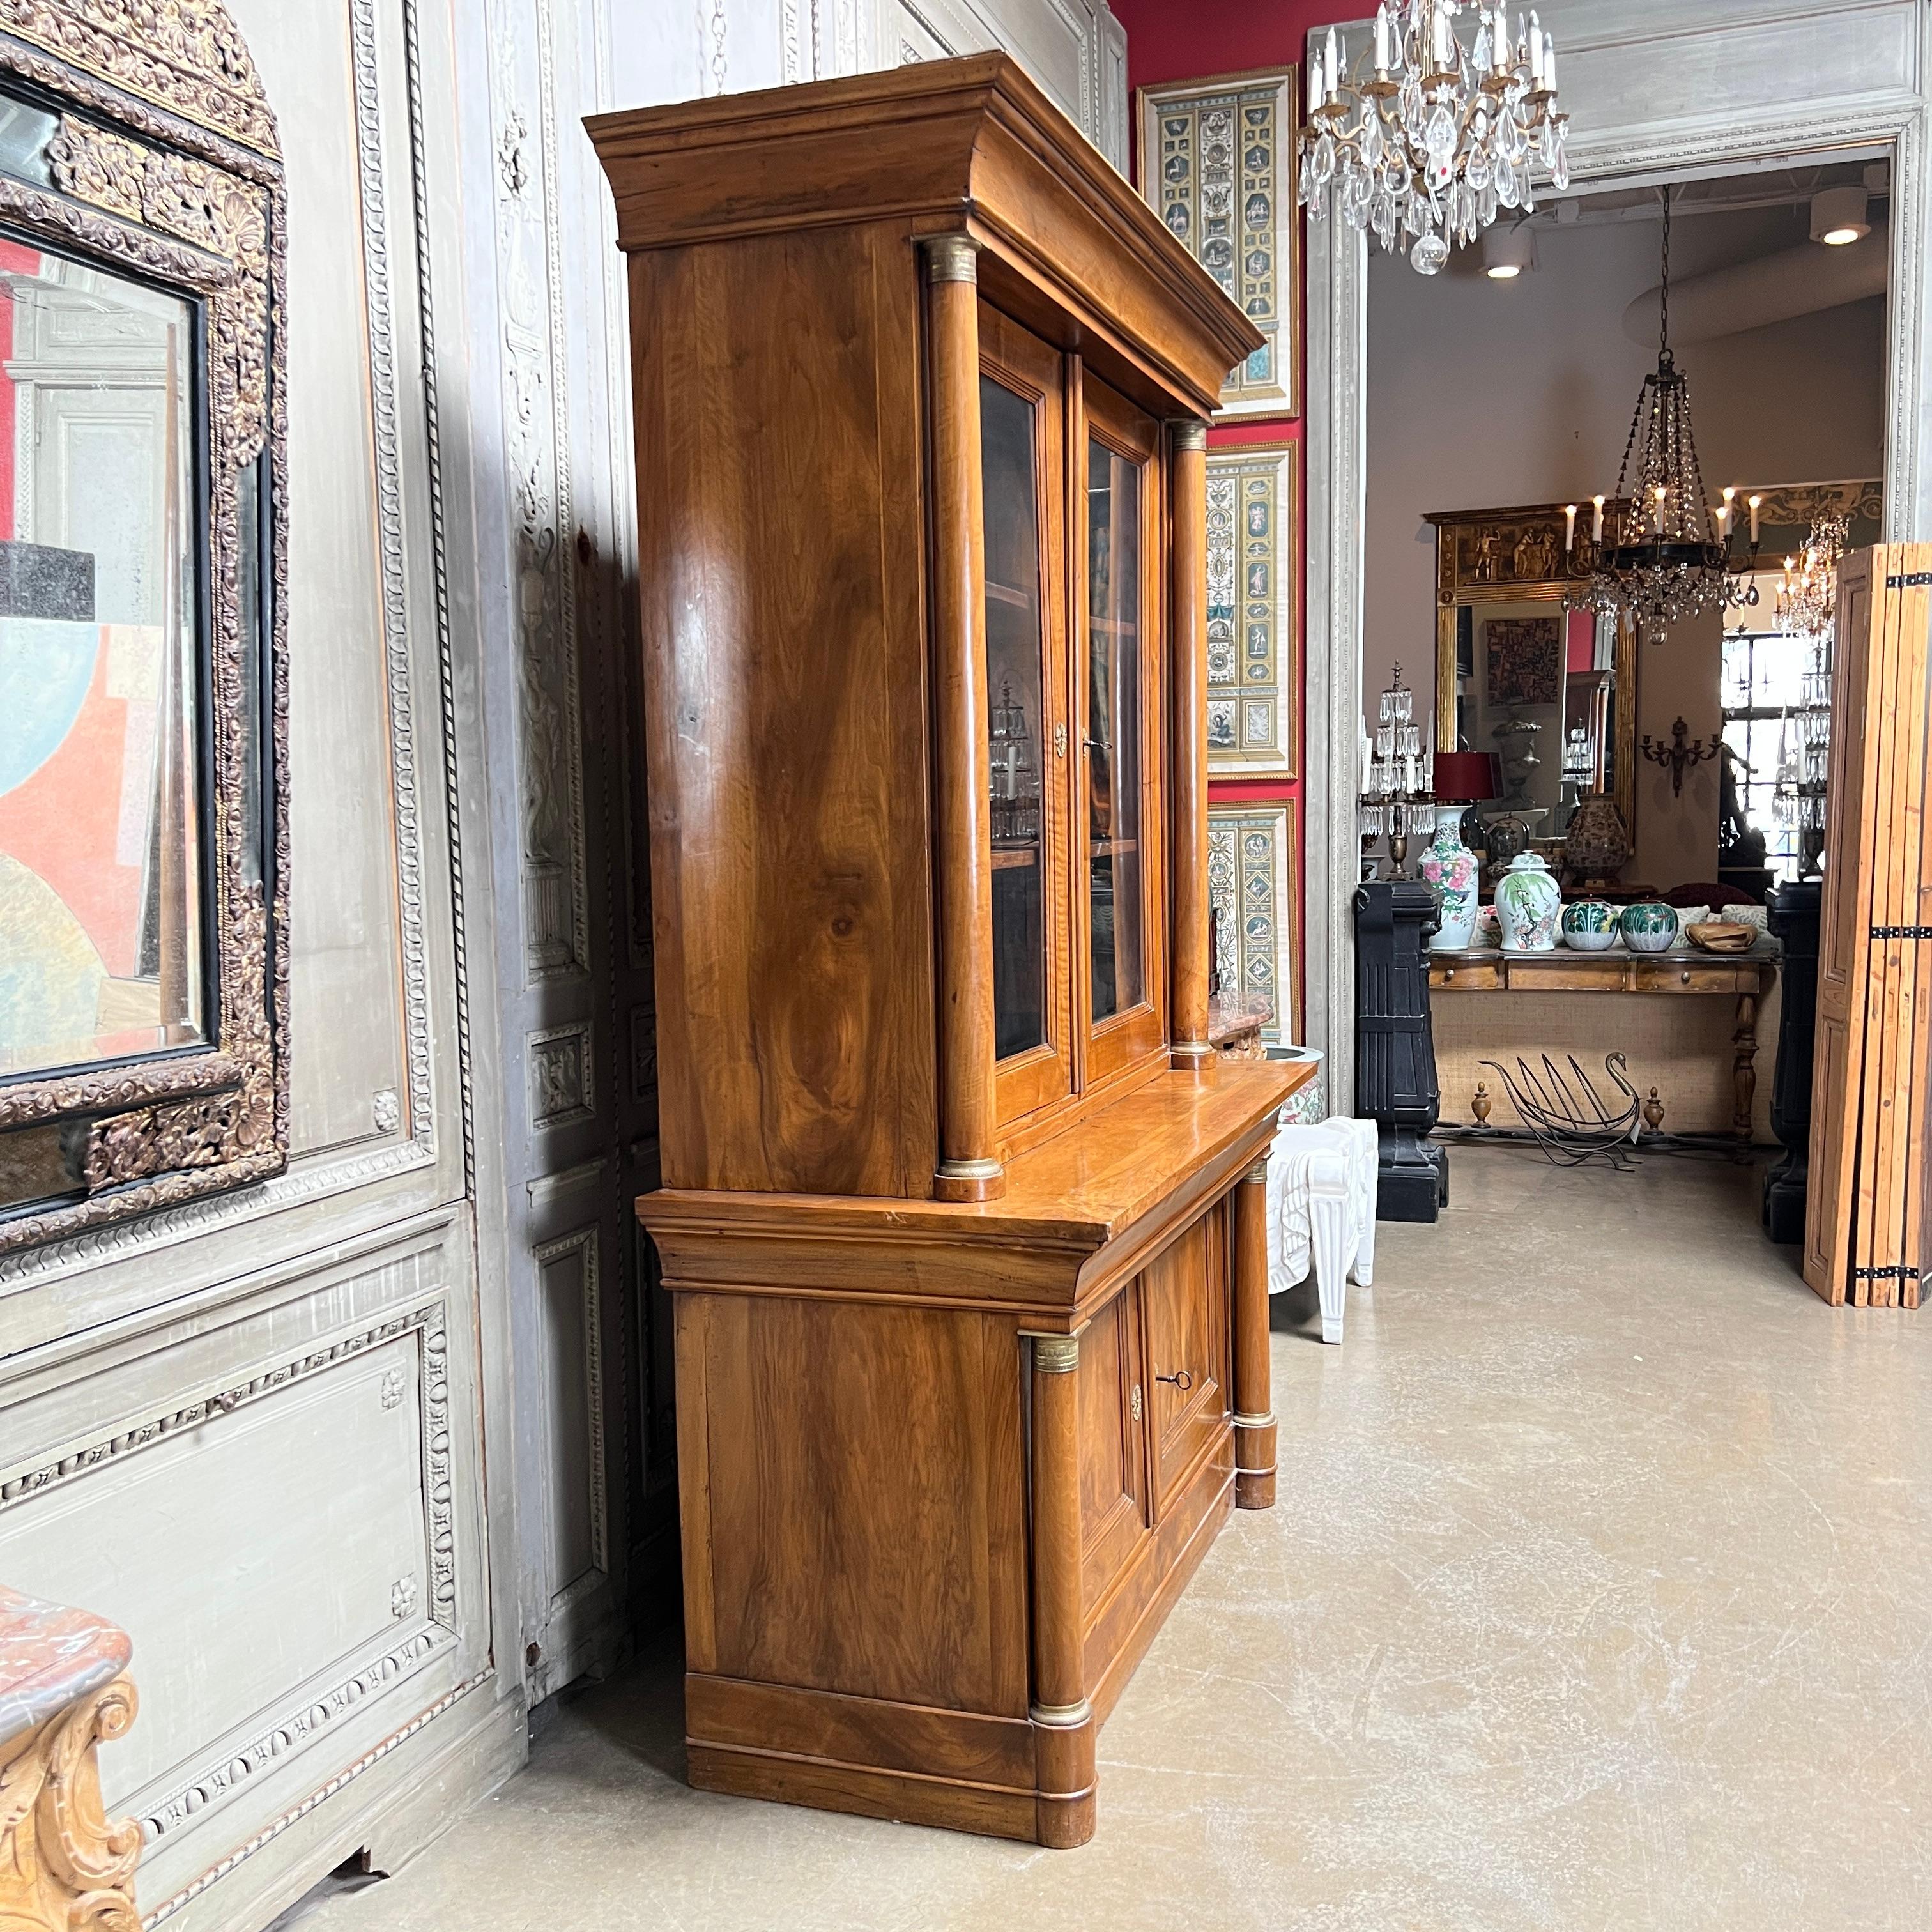 A large French Empire bookcase, or buffet a deux corps in walnut with bronze mounts and glass doors, dating from the early 19th century. 
This handsome piece has a nice old patina and well cast bronze mounts. It would make an ideal bookcase, house